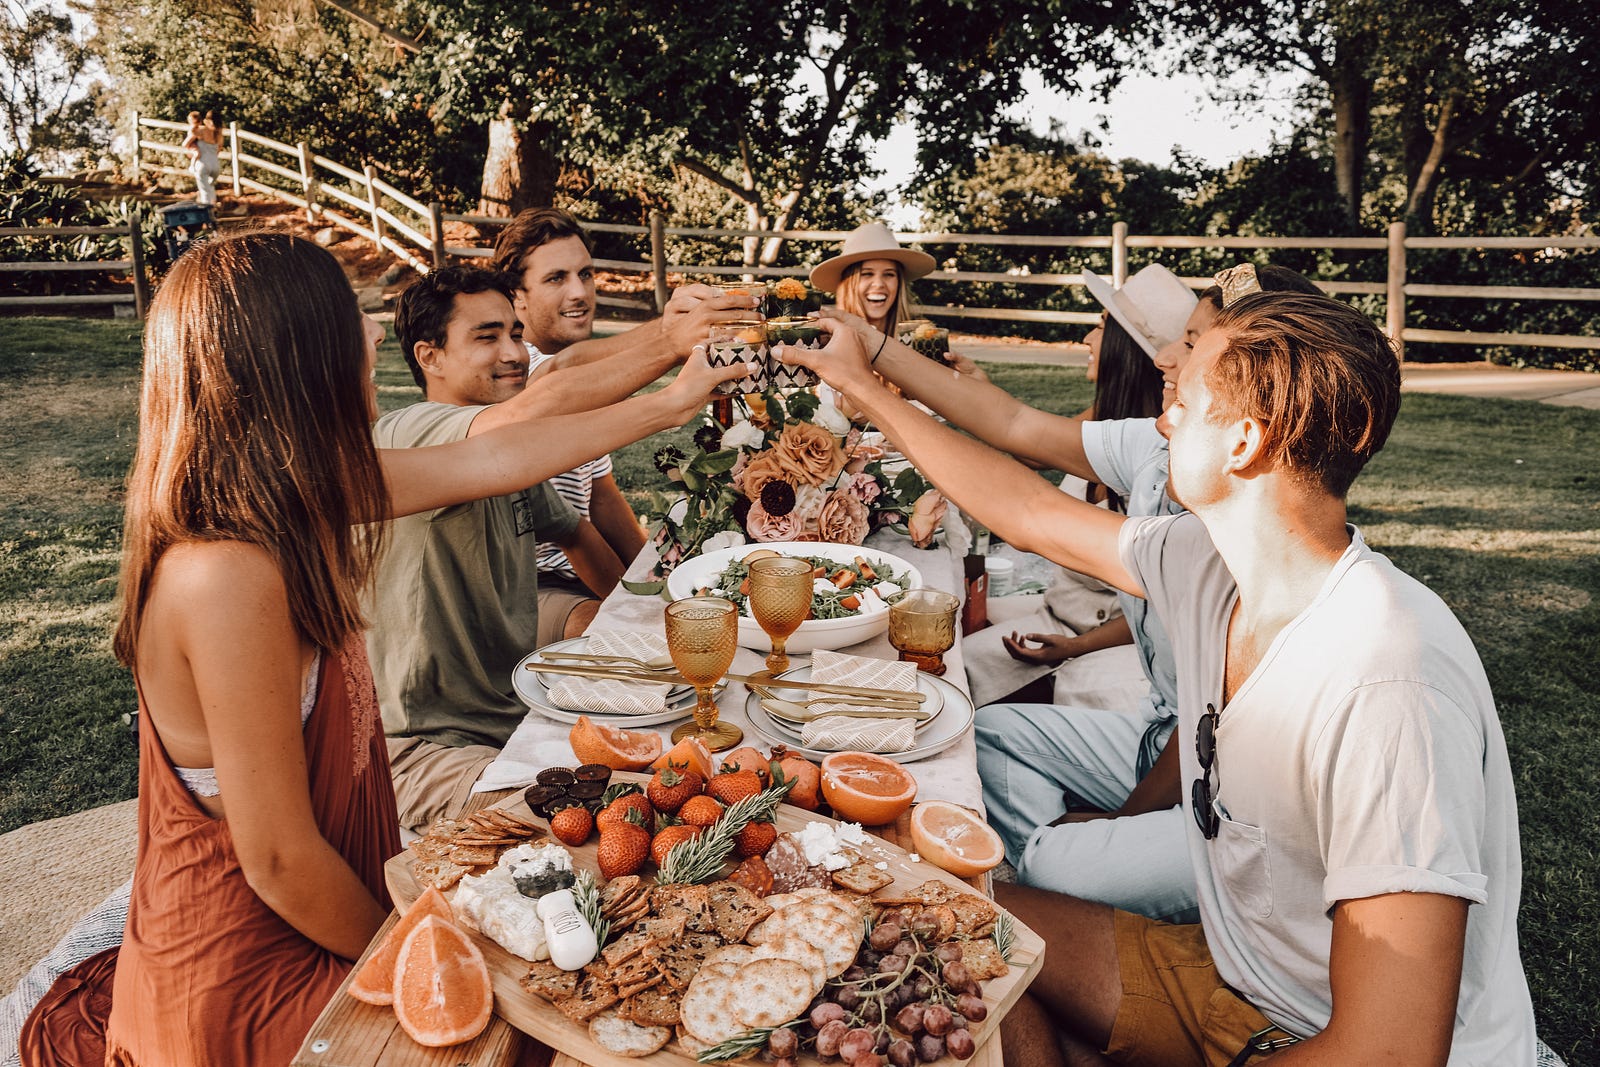 A group of young people raise their glasses —  to toast one another —  over a long dinner table. Loneliness, on the other hand, has been associated with adverse health outcomes comparable to the impact of smoking or obesity.